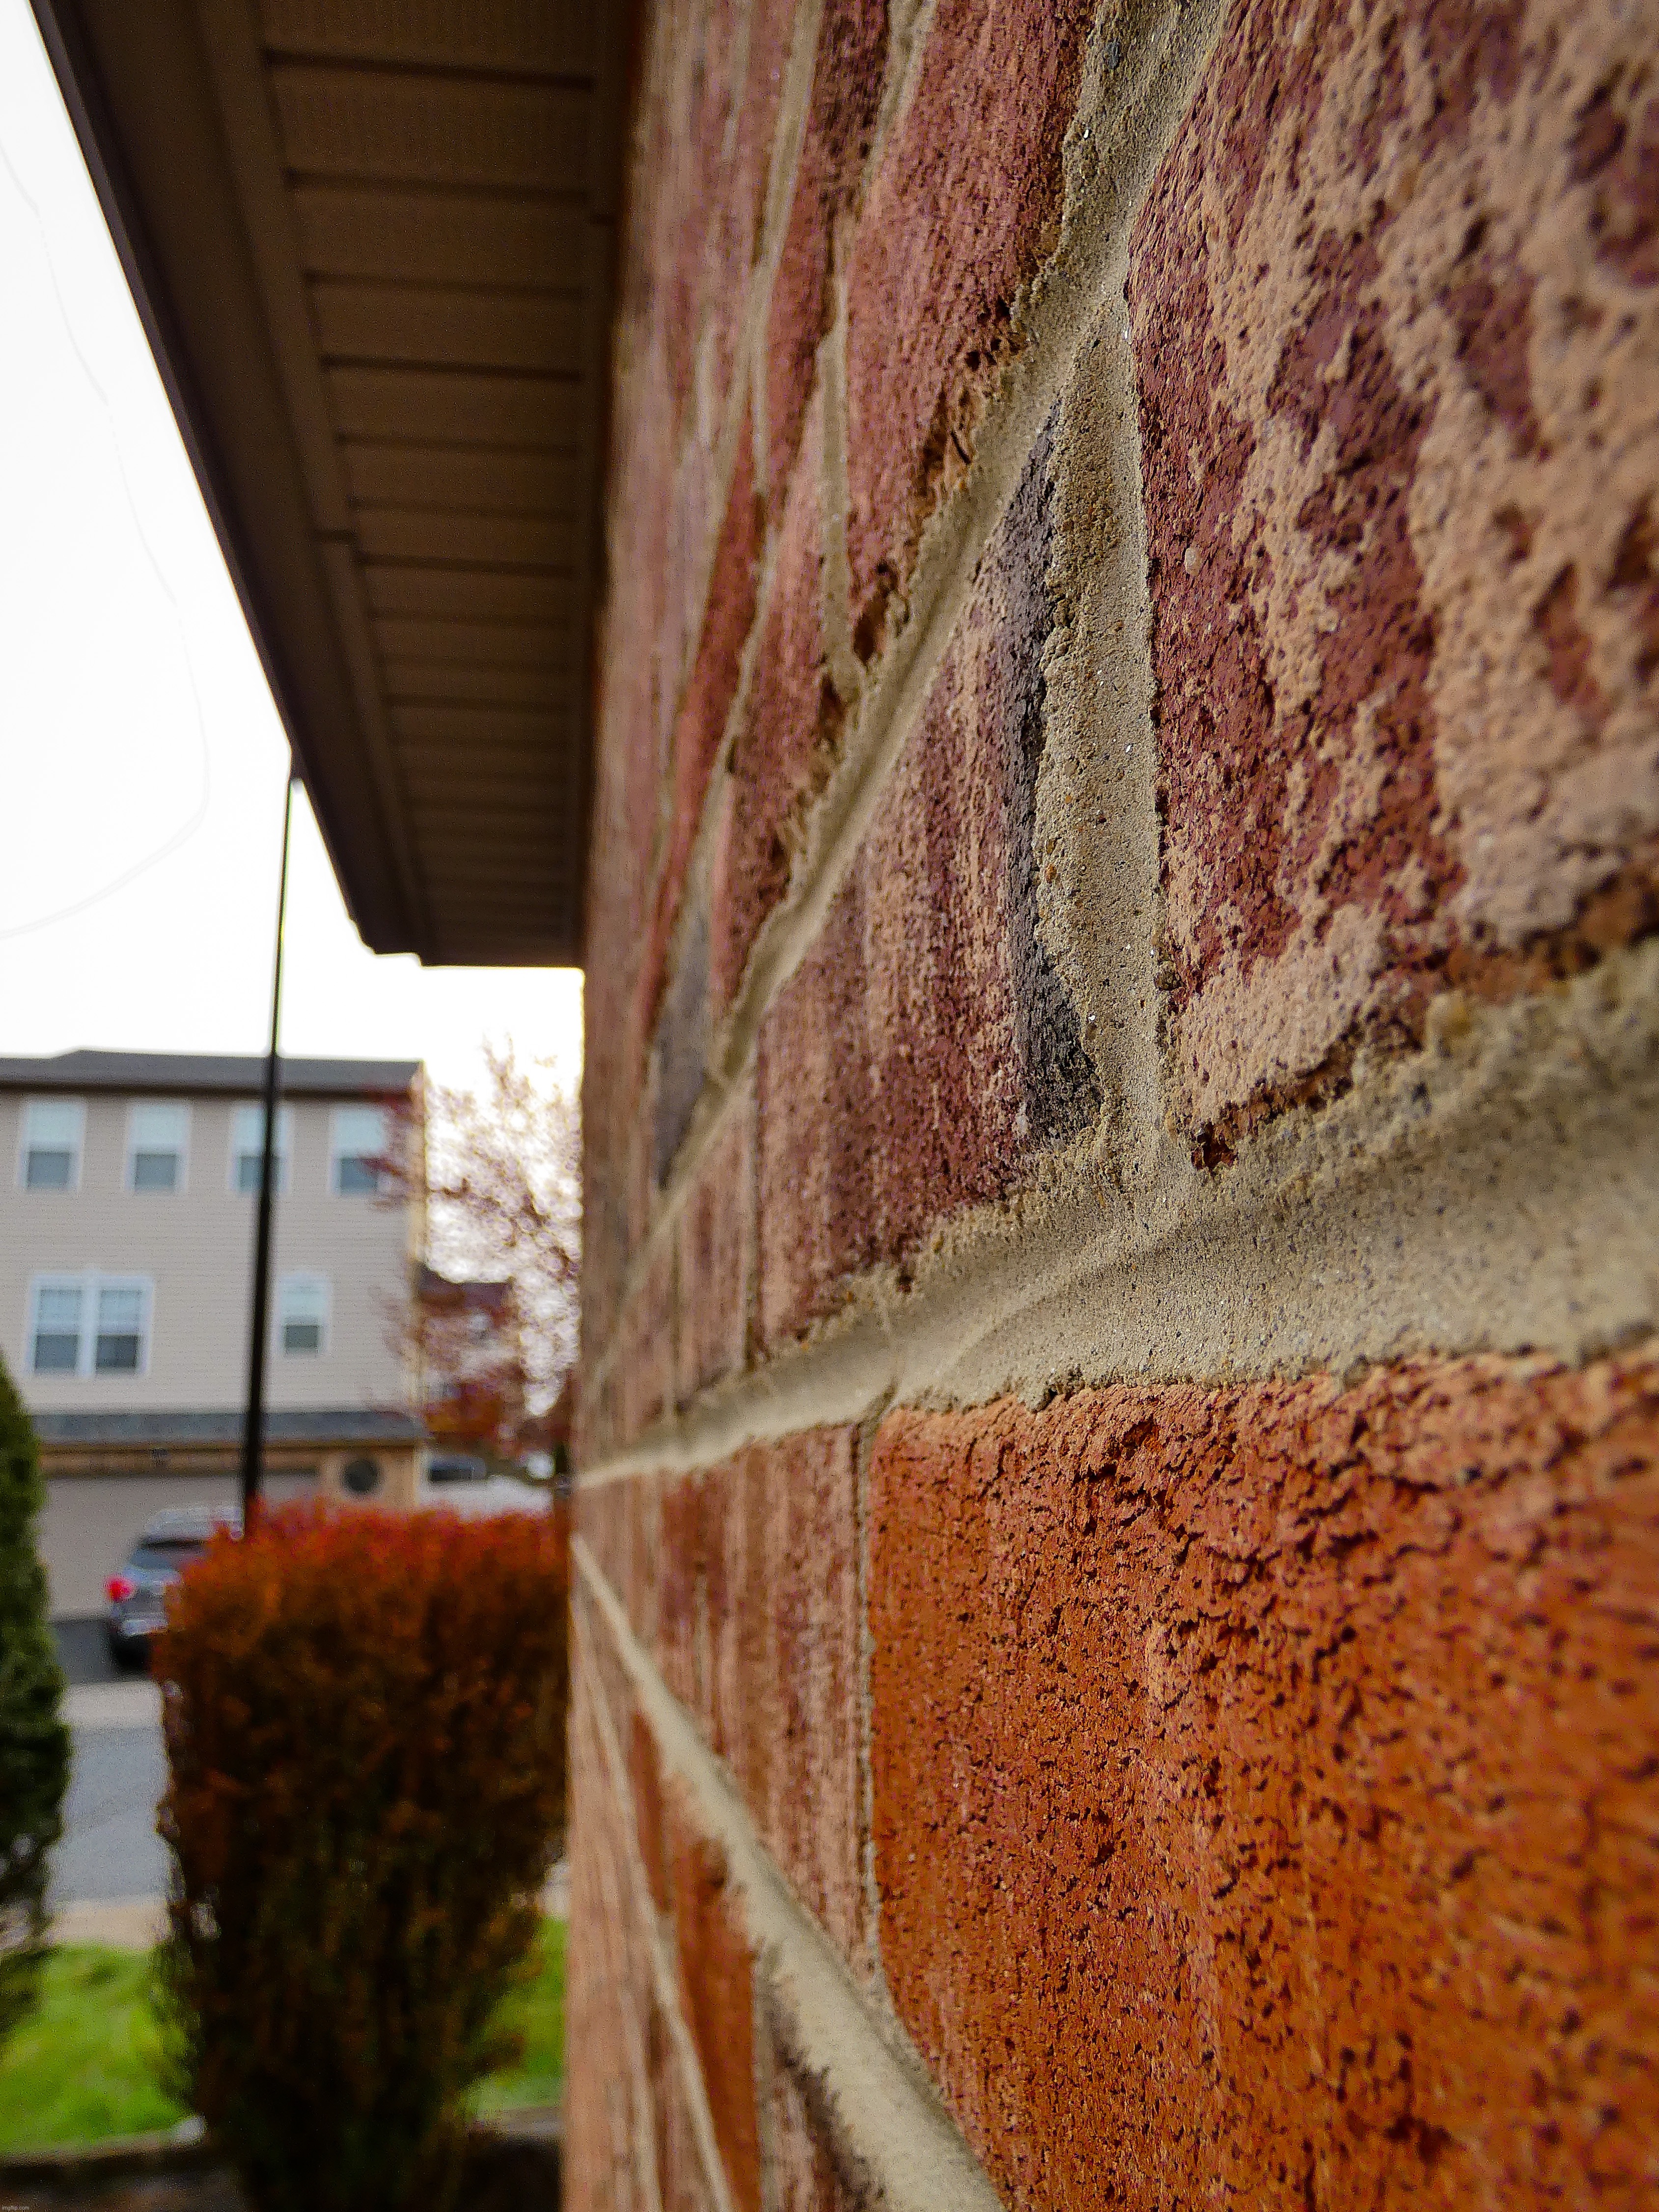 A cool side view of a brick wall | image tagged in share your own photos | made w/ Imgflip meme maker